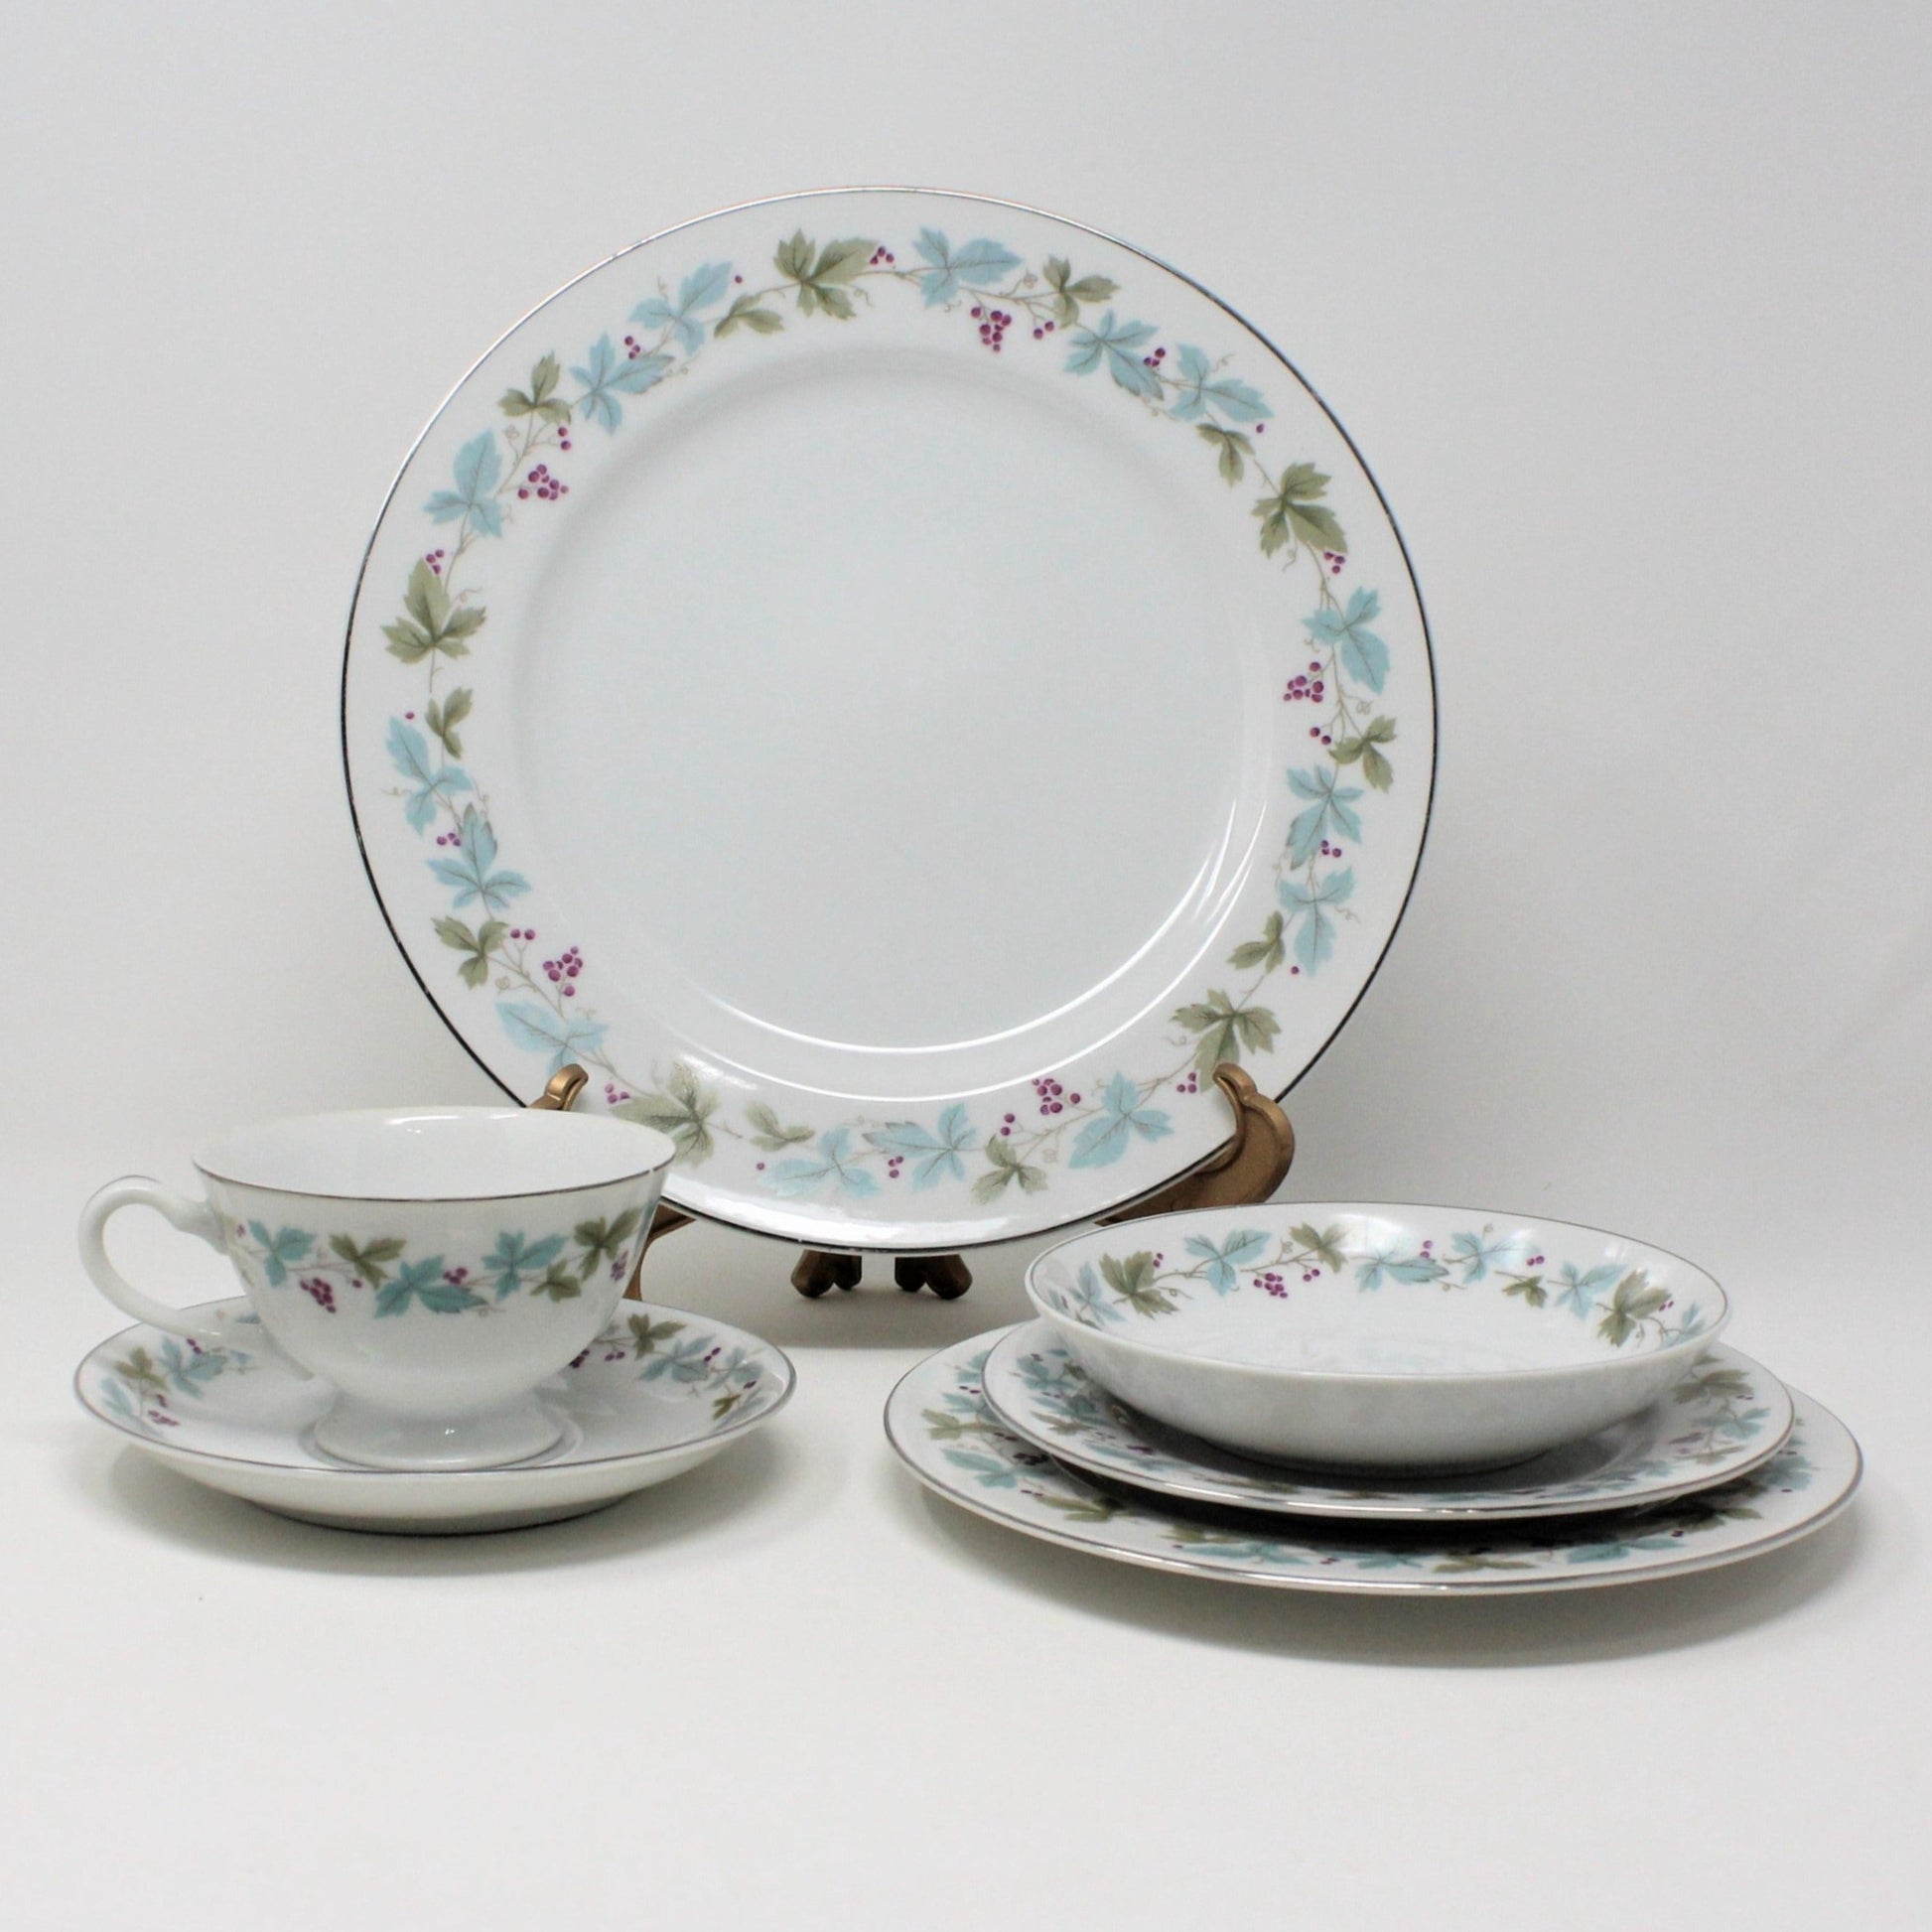 Fine China of Japan, Vintage 6701 pattern. Complete Dinnerware Set includes Dinner Plate, Salad Plate, Bread & Butter Plate, Dessert Bowl and Cup with Saucer